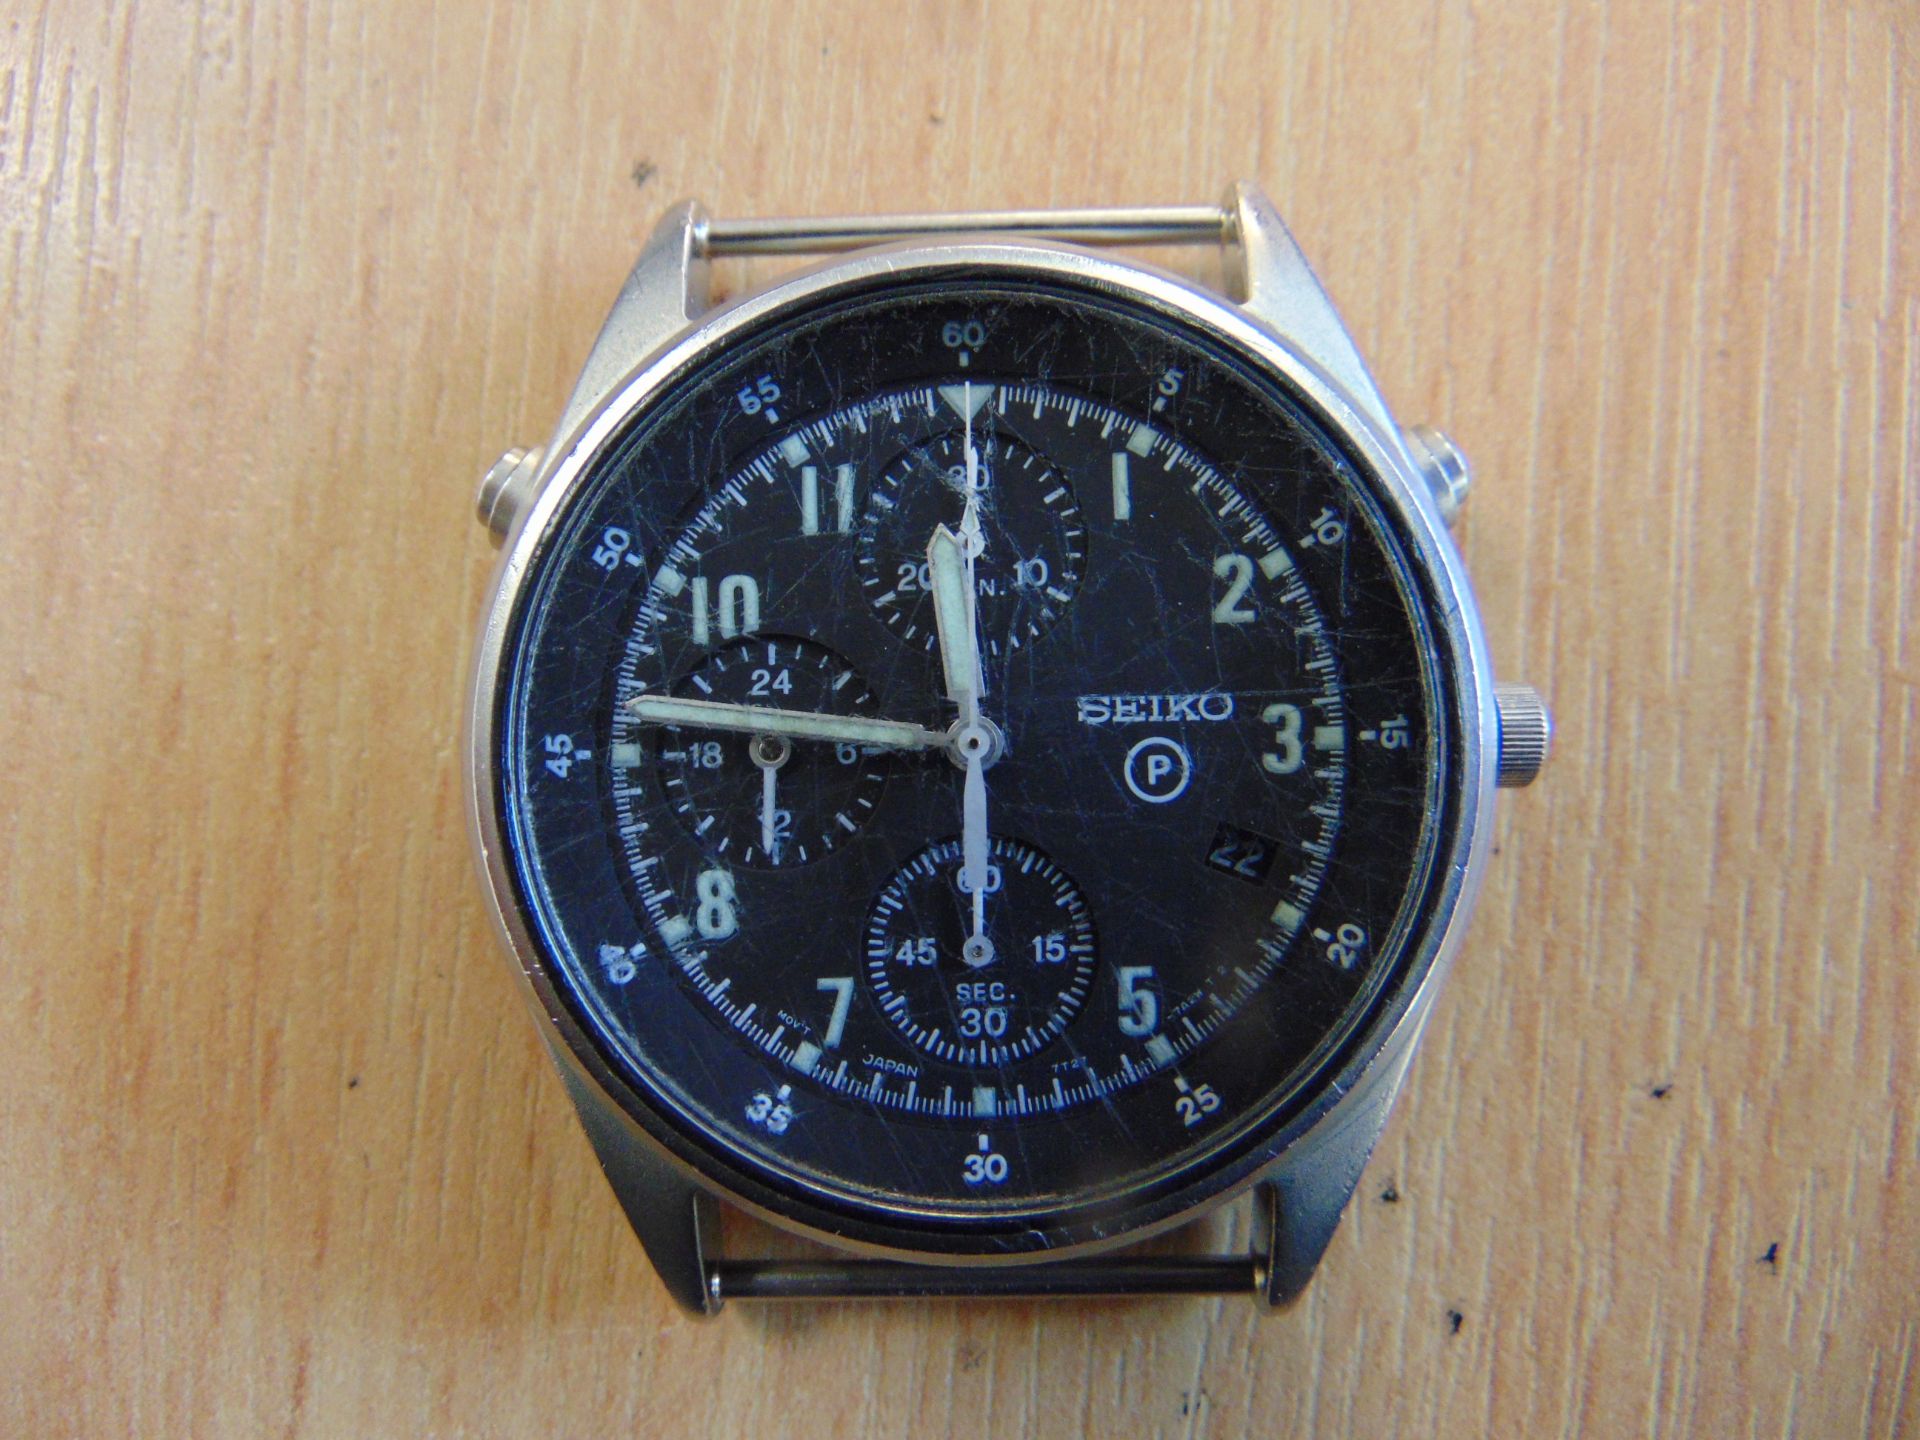 SEIKO RAF ISSUE PILOTS CHRONO GEN 2 WATCH NATO MARKED DATED 1996 - NEW BATTERY AND STRAP - Image 4 of 11